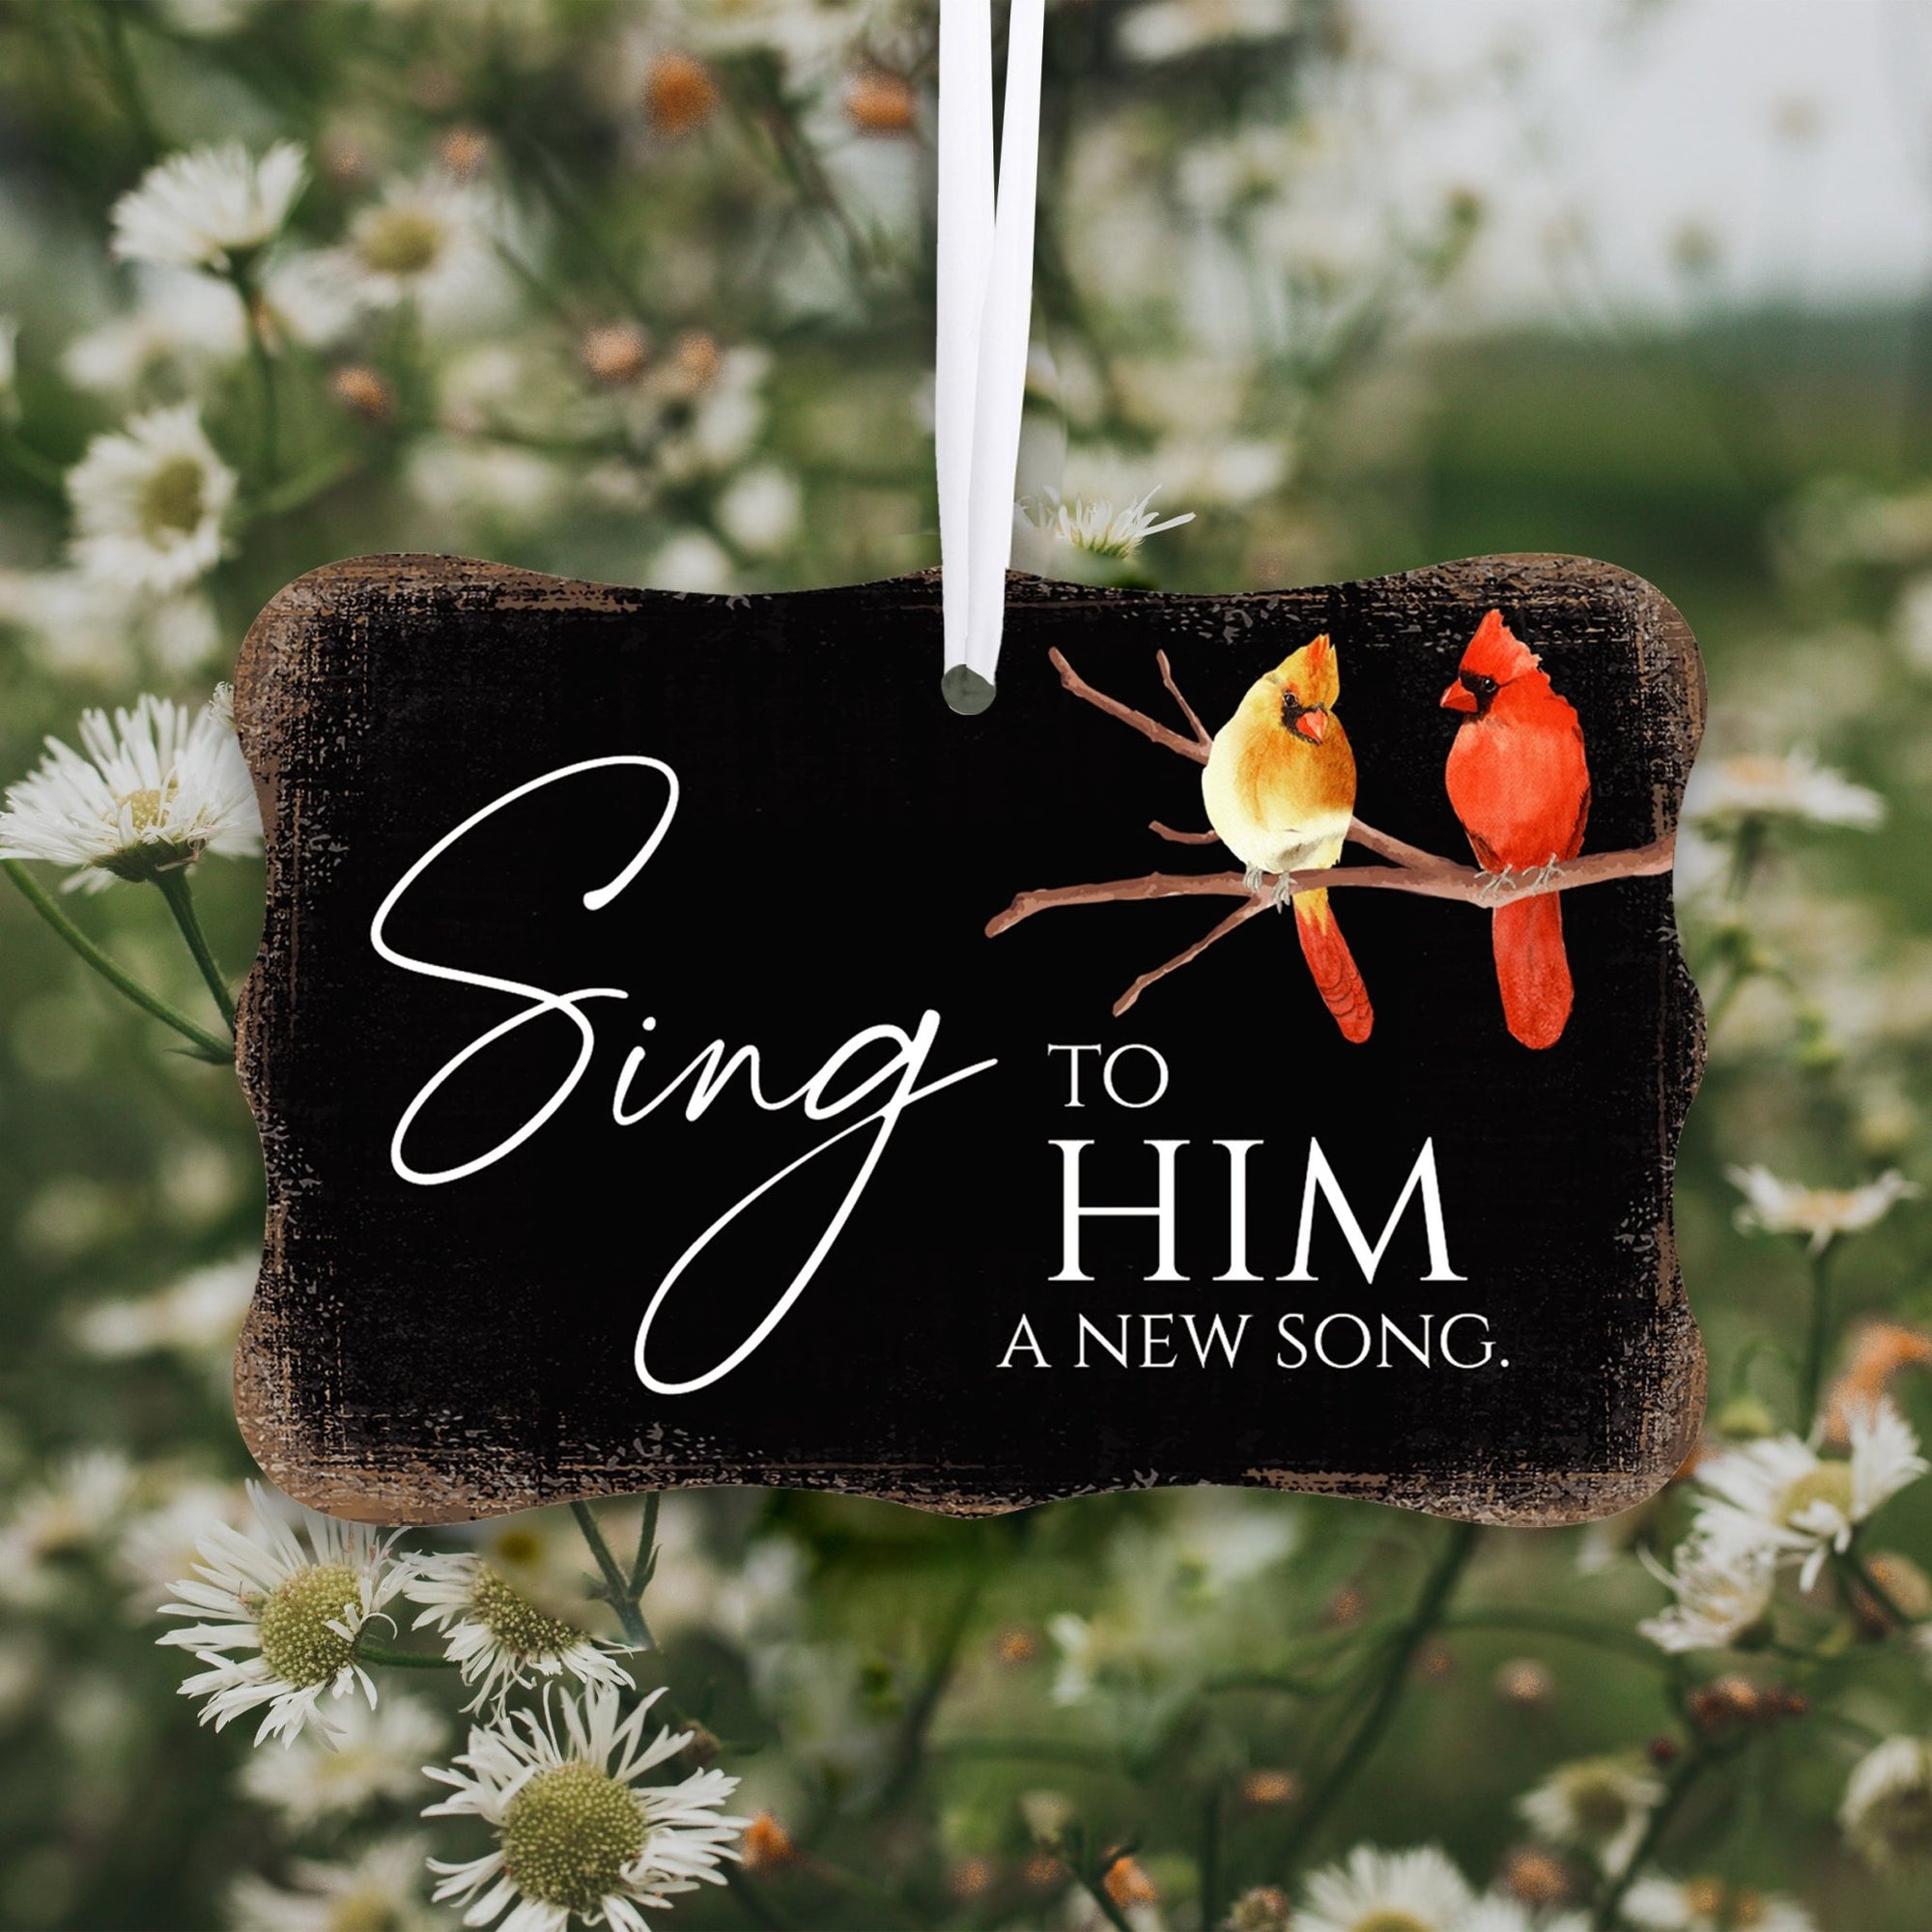 Rustic Scalloped Cardinal Wooden Ornament With Everyday Verses Gift Ideas - Sing To Him - LifeSong Milestones